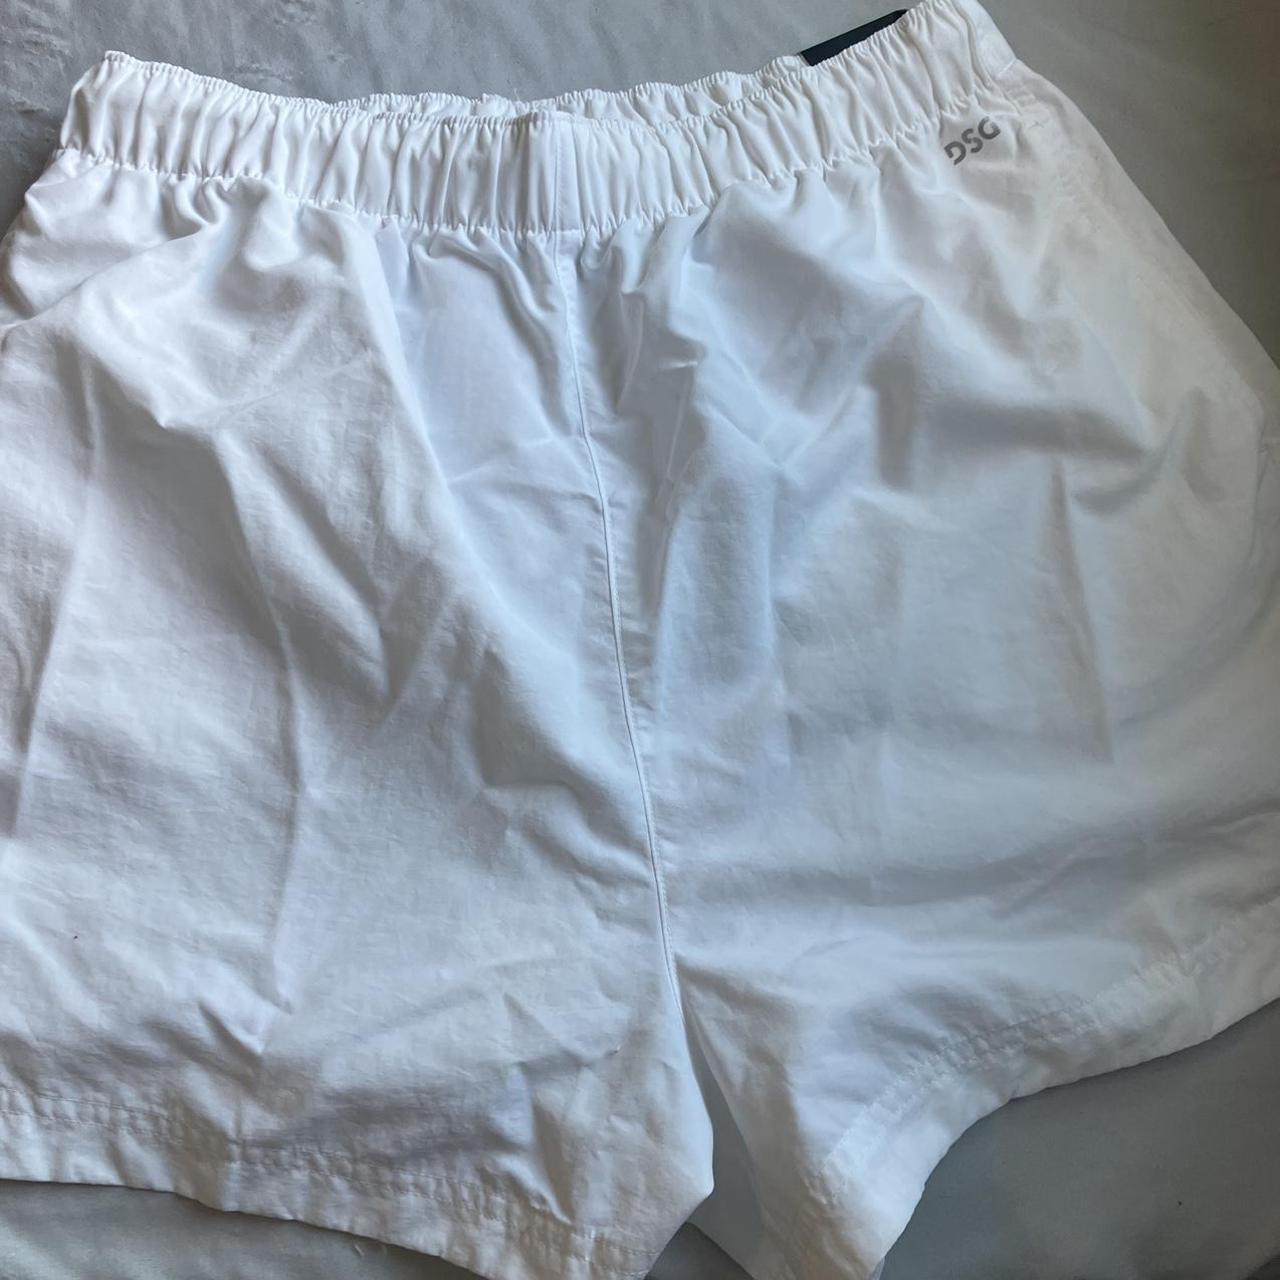 White DSG shorts(with tags) - Depop